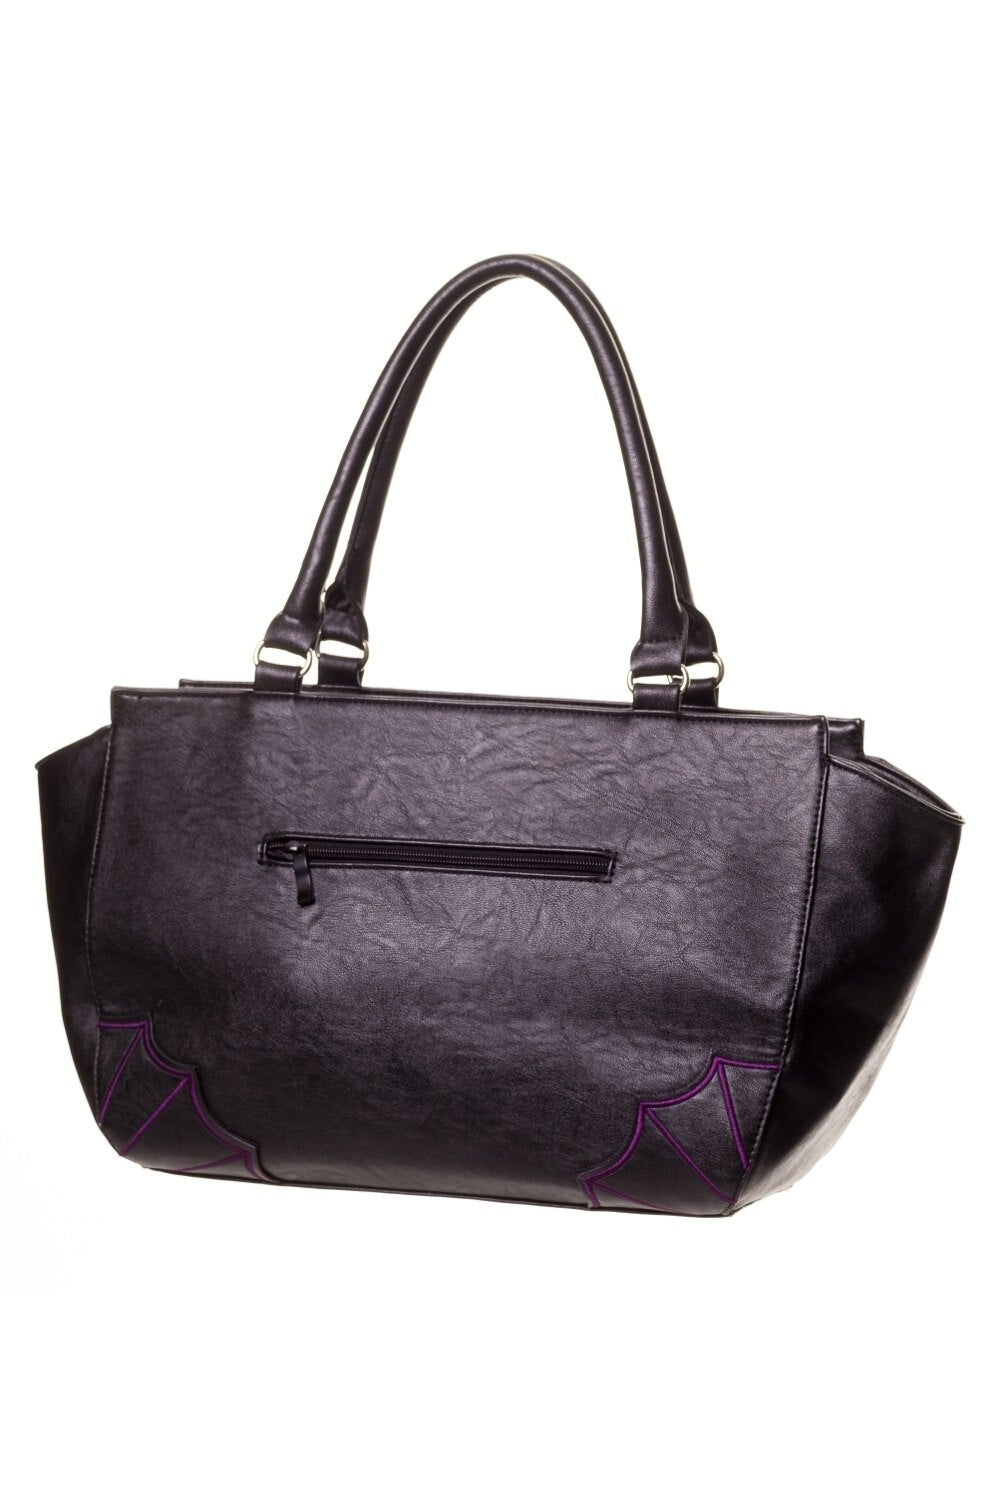 Back of Large handbag with spider web and bat details in purple